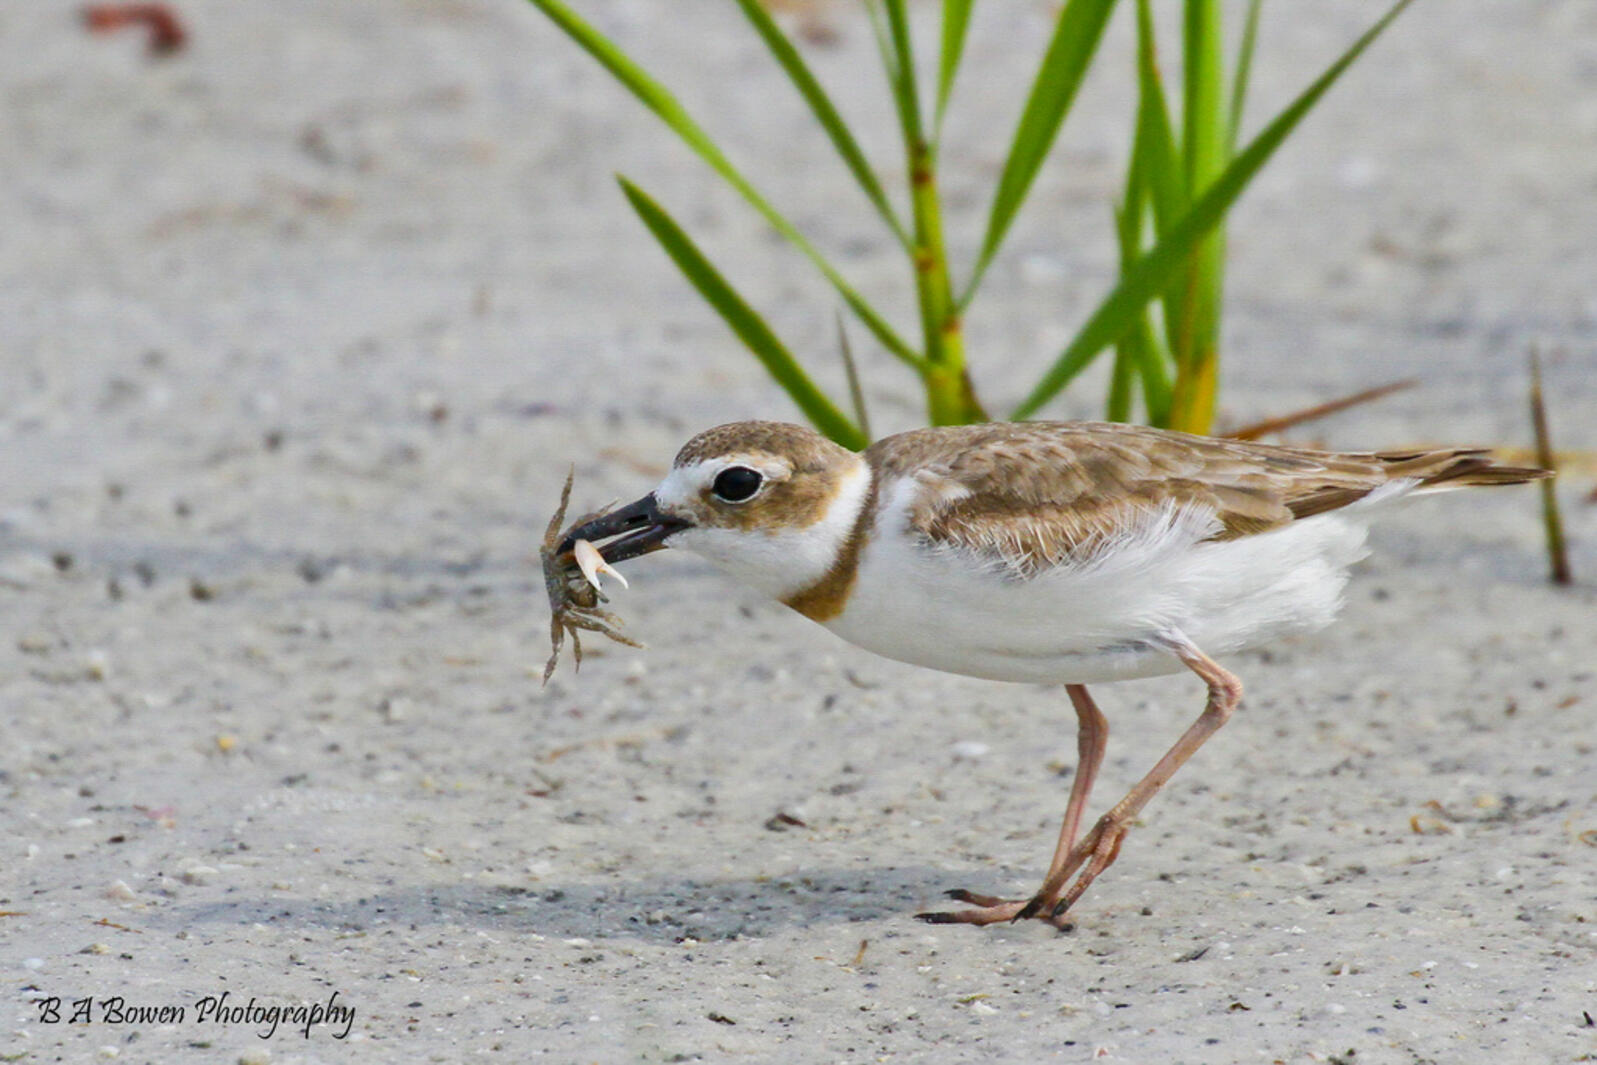 Wilson's Plover with a crab in its beak, standing on the beach.